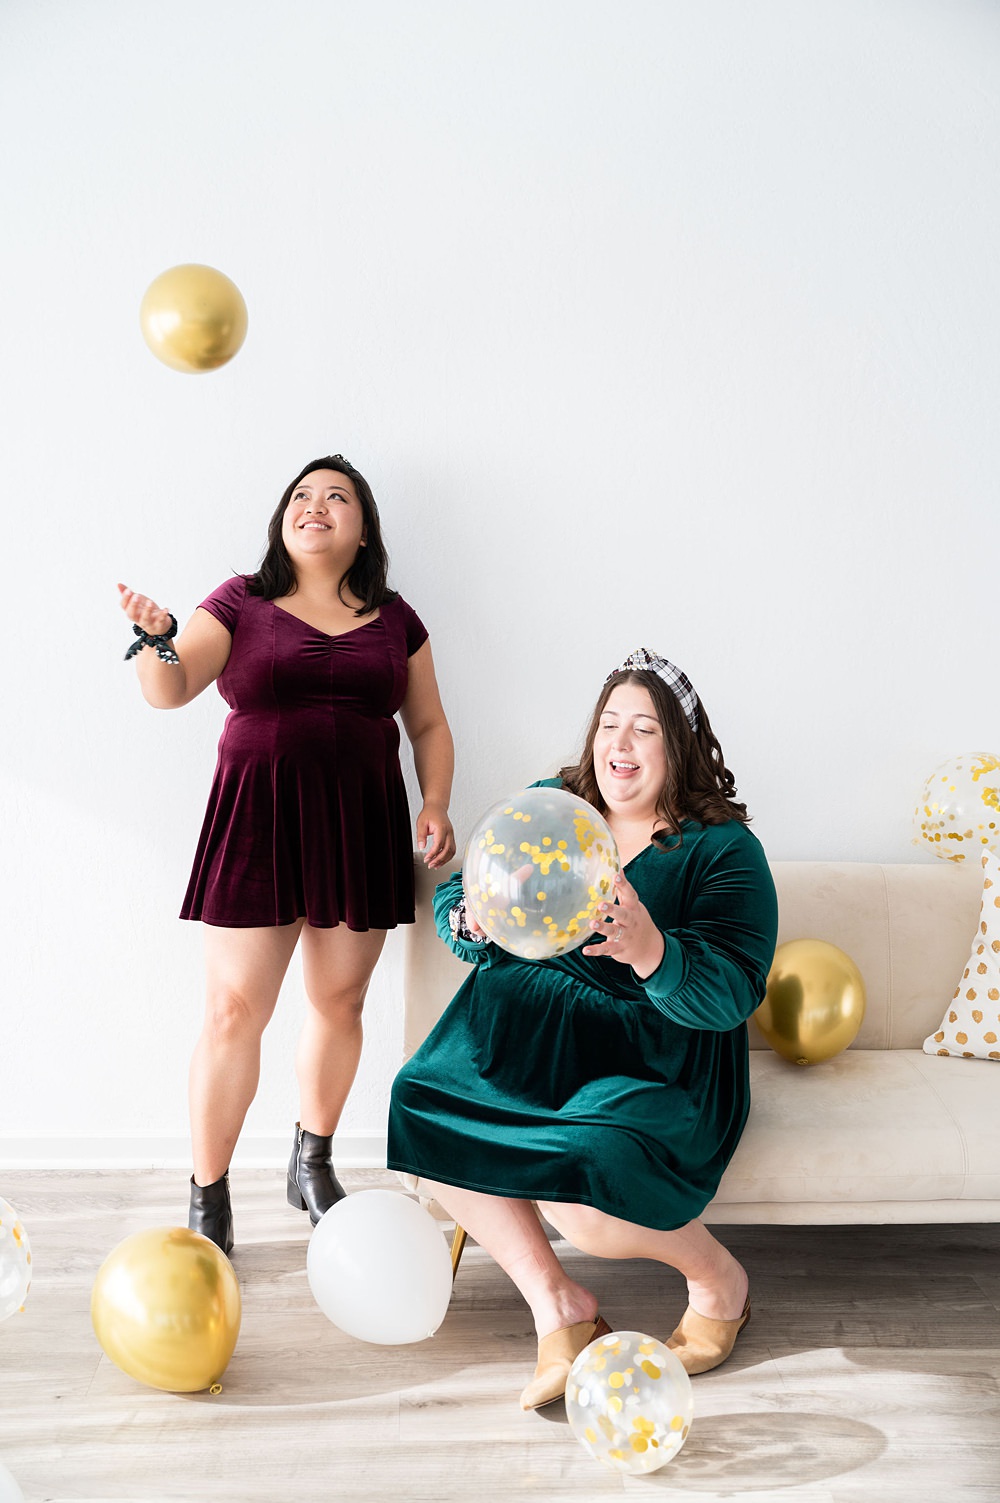 Two women holding balloons. The other woman is standing up and the other is sitting on the couch.